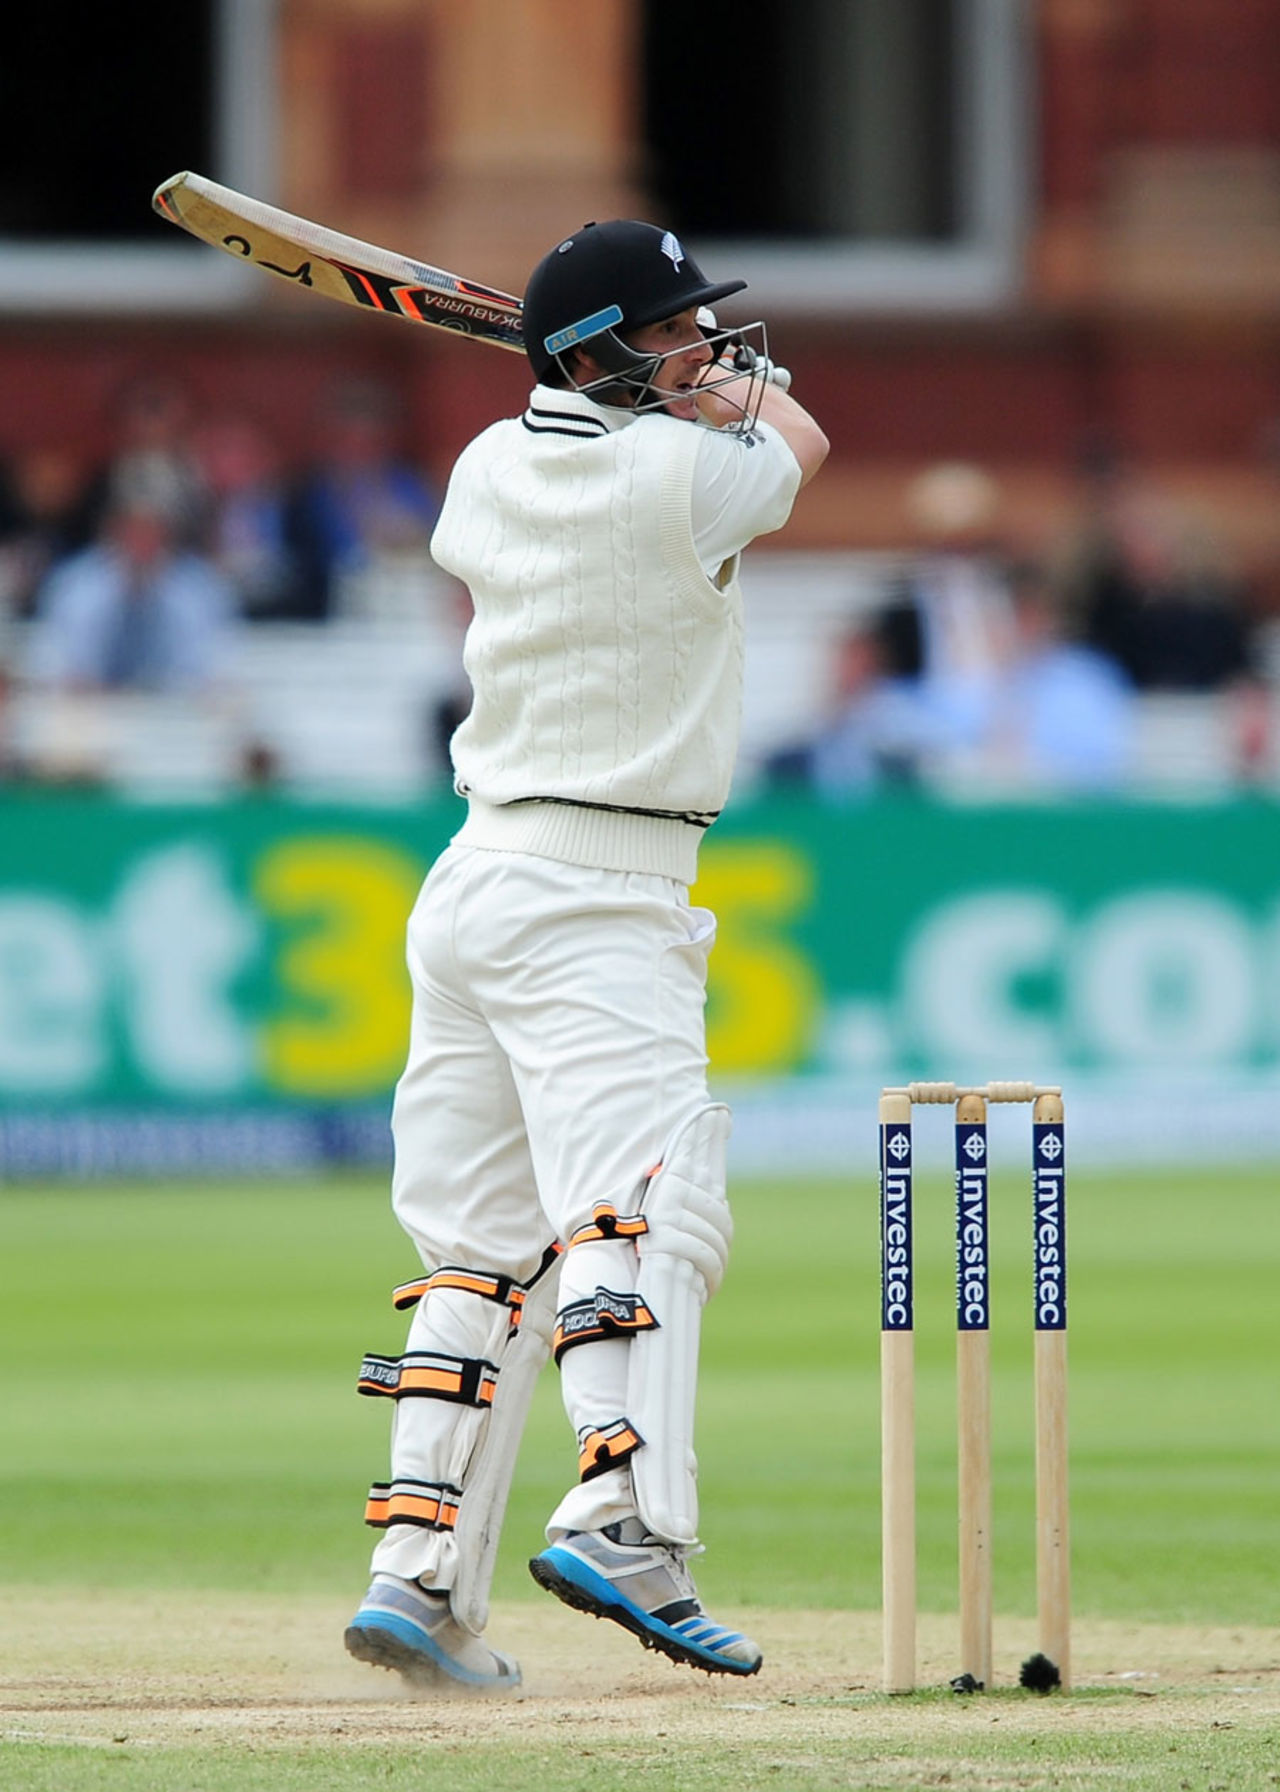 BJ Watling was promoted up the order, England v New Zealand, 1st Investec Test, Lord's, 5th day, May 25, 2015